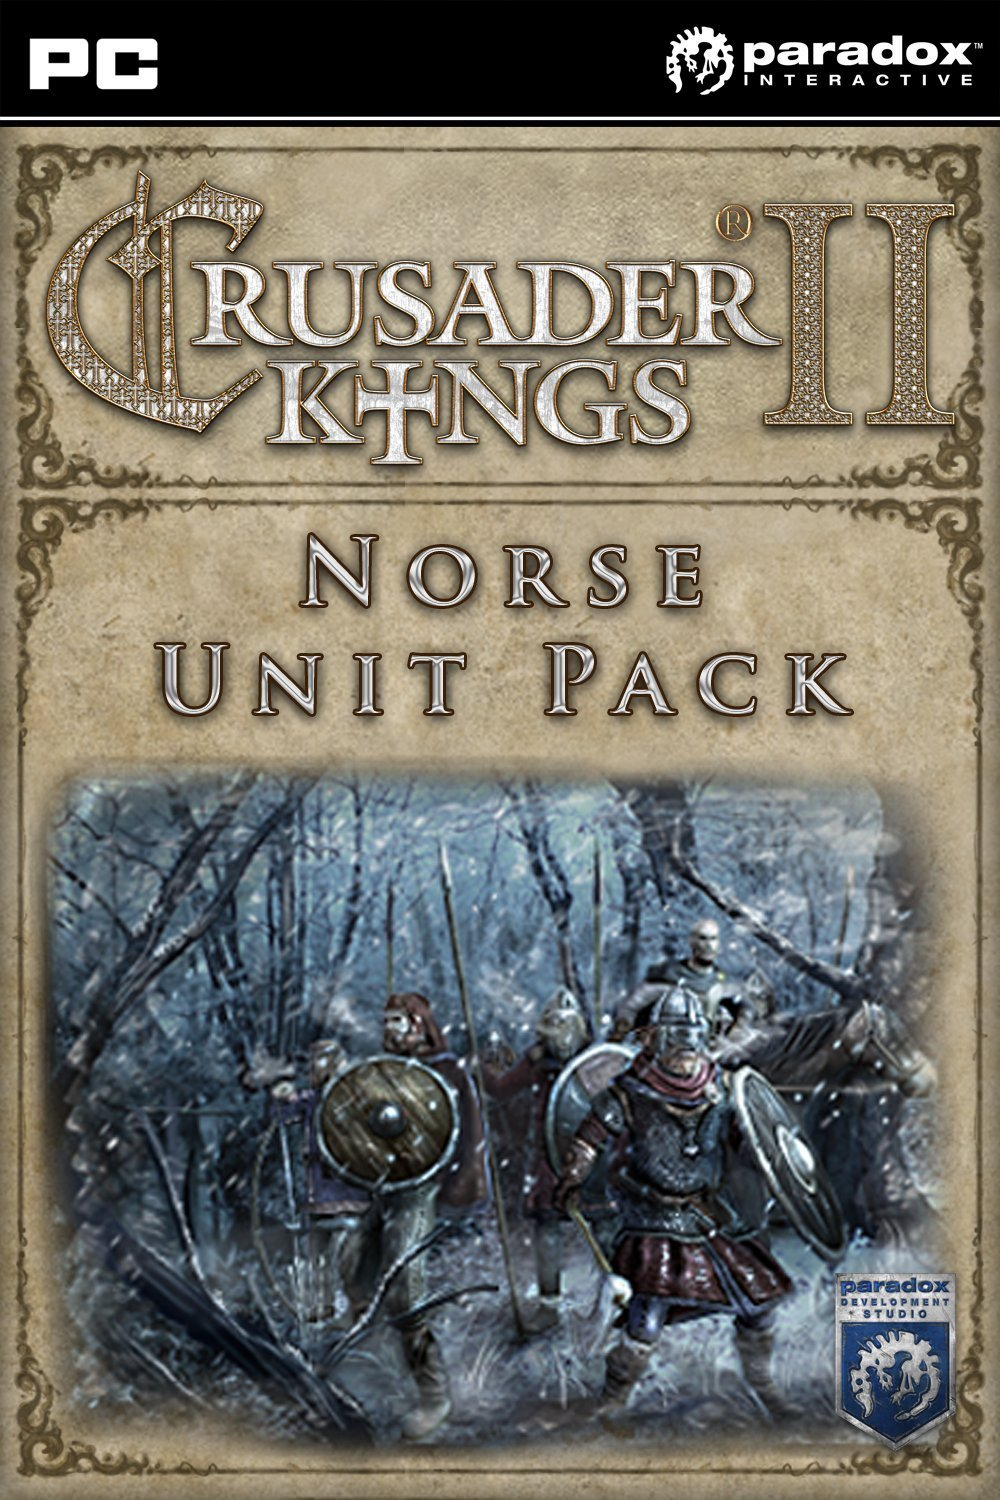 crusader kings 2 mods game of thrones strategy guide